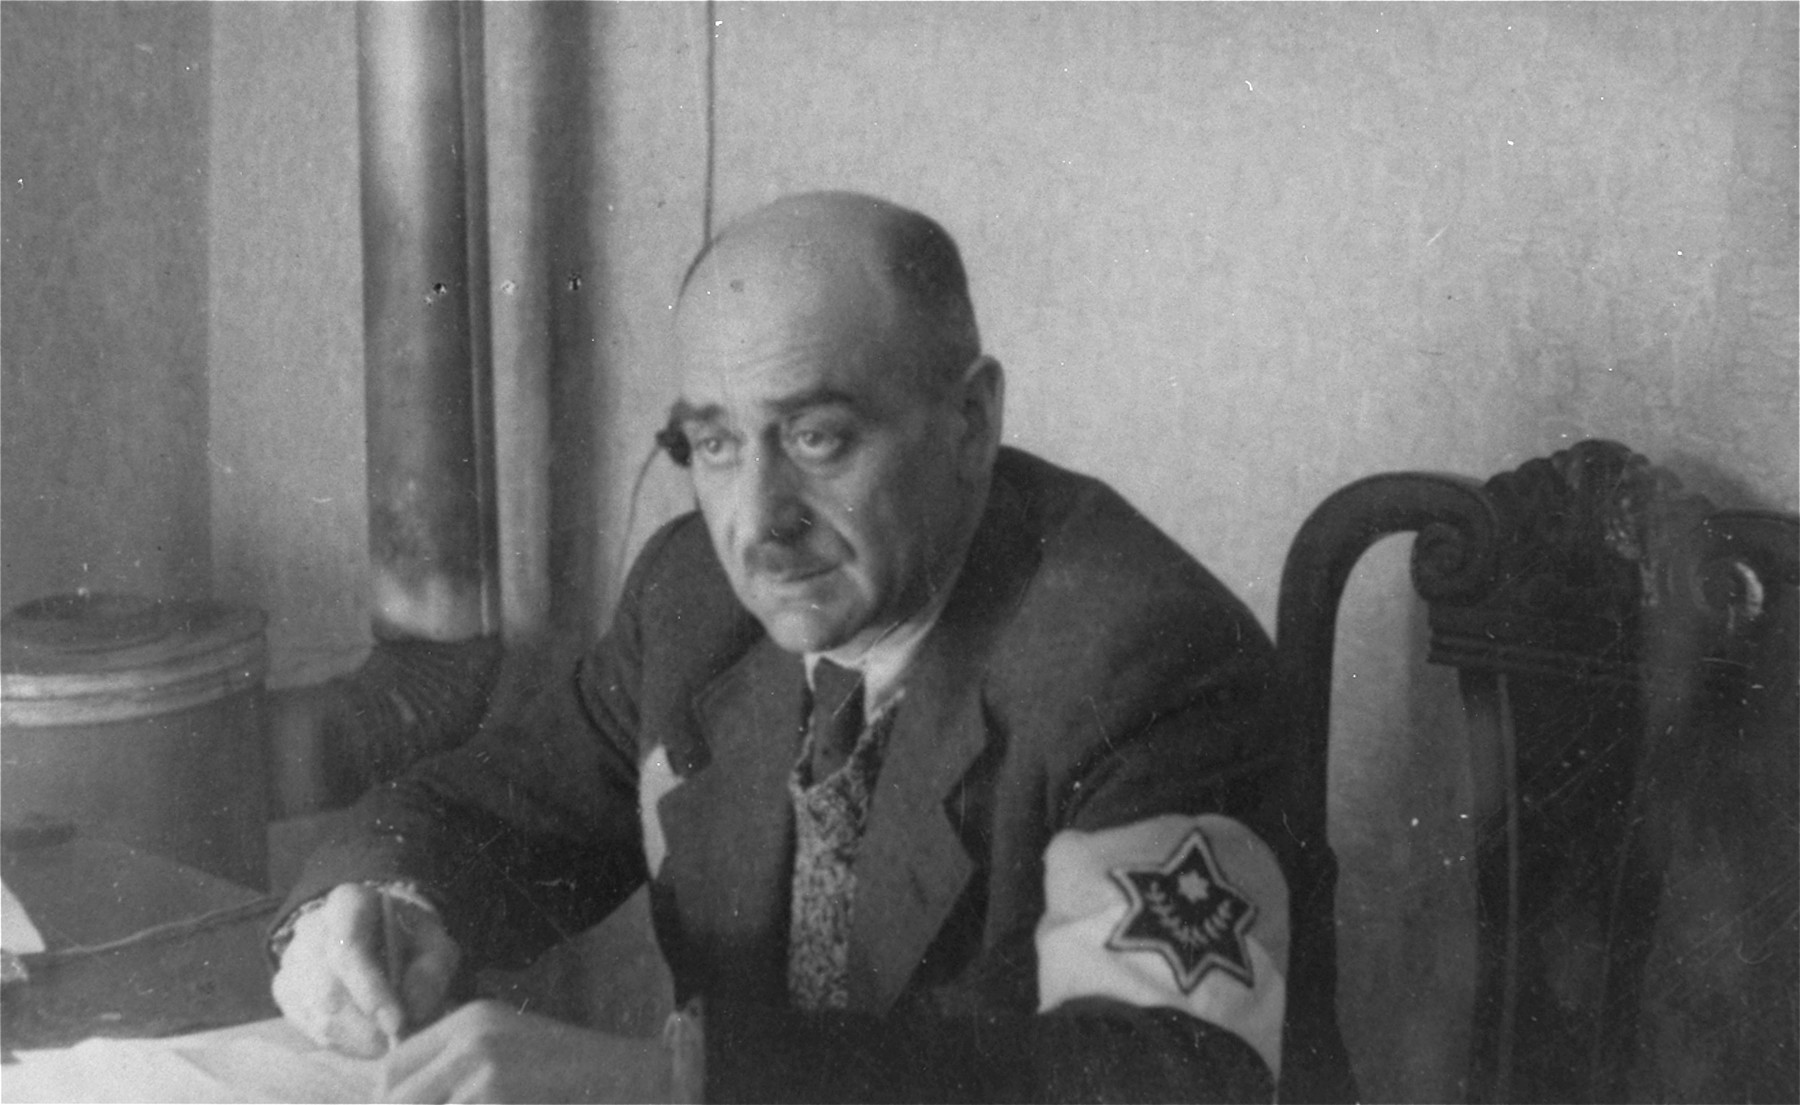 Leon Rozenblat, chief of the ghetto police, is seated in his office in the Lodz ghetto.